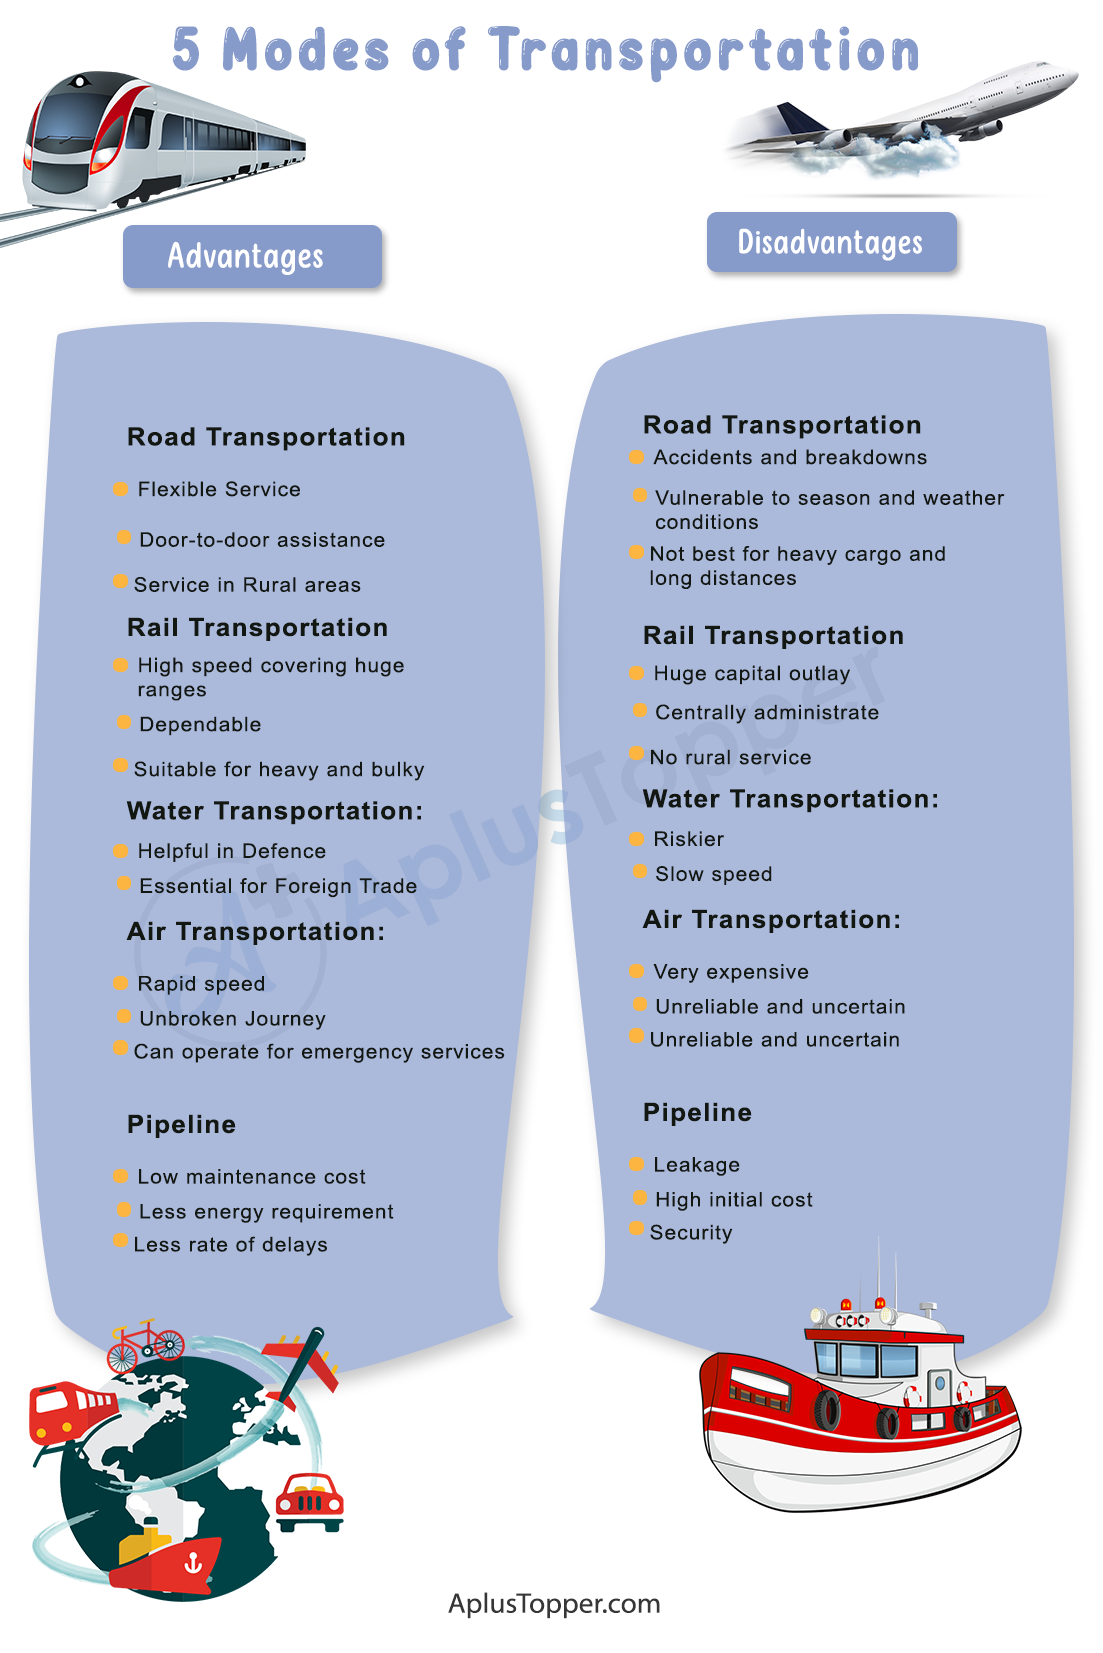 5 Modes of Transportation and Their Advantages and Disadvantages 1